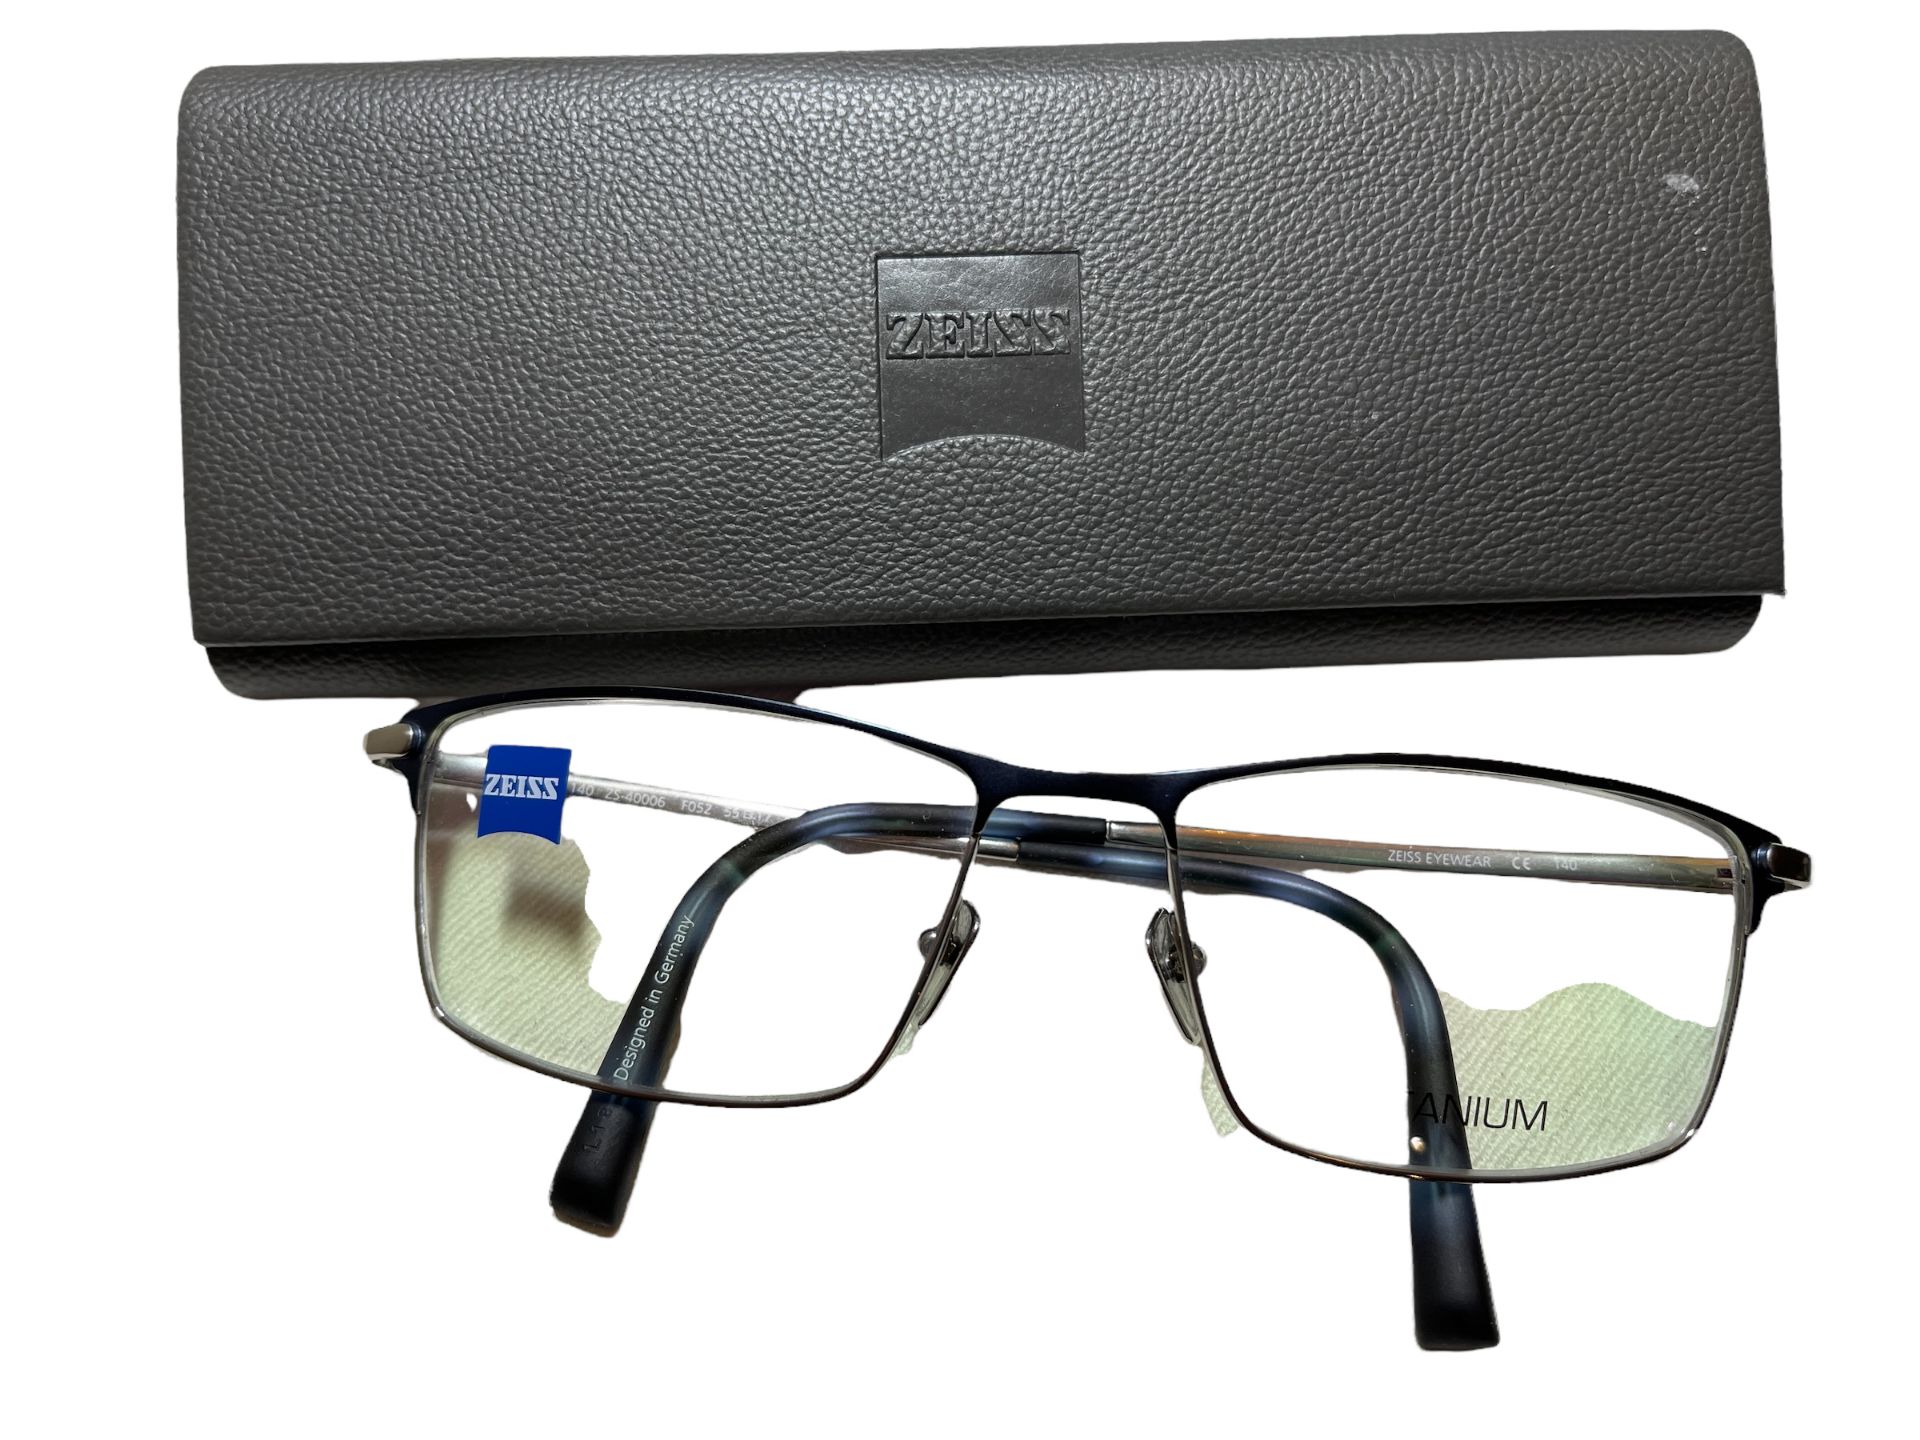 Zeiss Spectacle Frames with Original Case and Certificate - Surplus Stock from Private Jet Charte... - Image 3 of 3